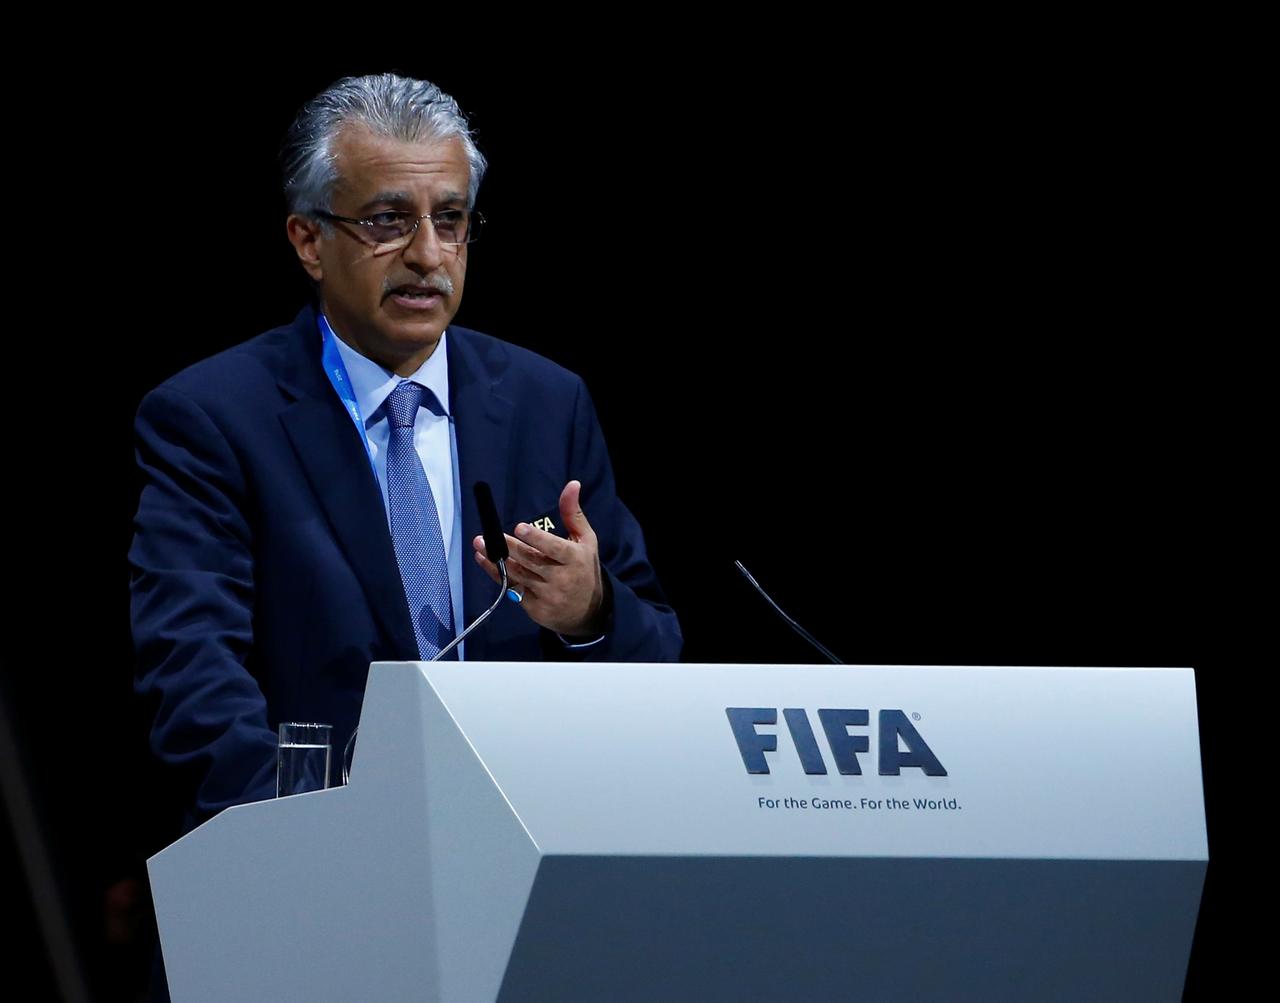 Sheikh Salman now starts a new term lasting until 2023 which also renews his position as world body FIFA's senior vice-president under Infantino.